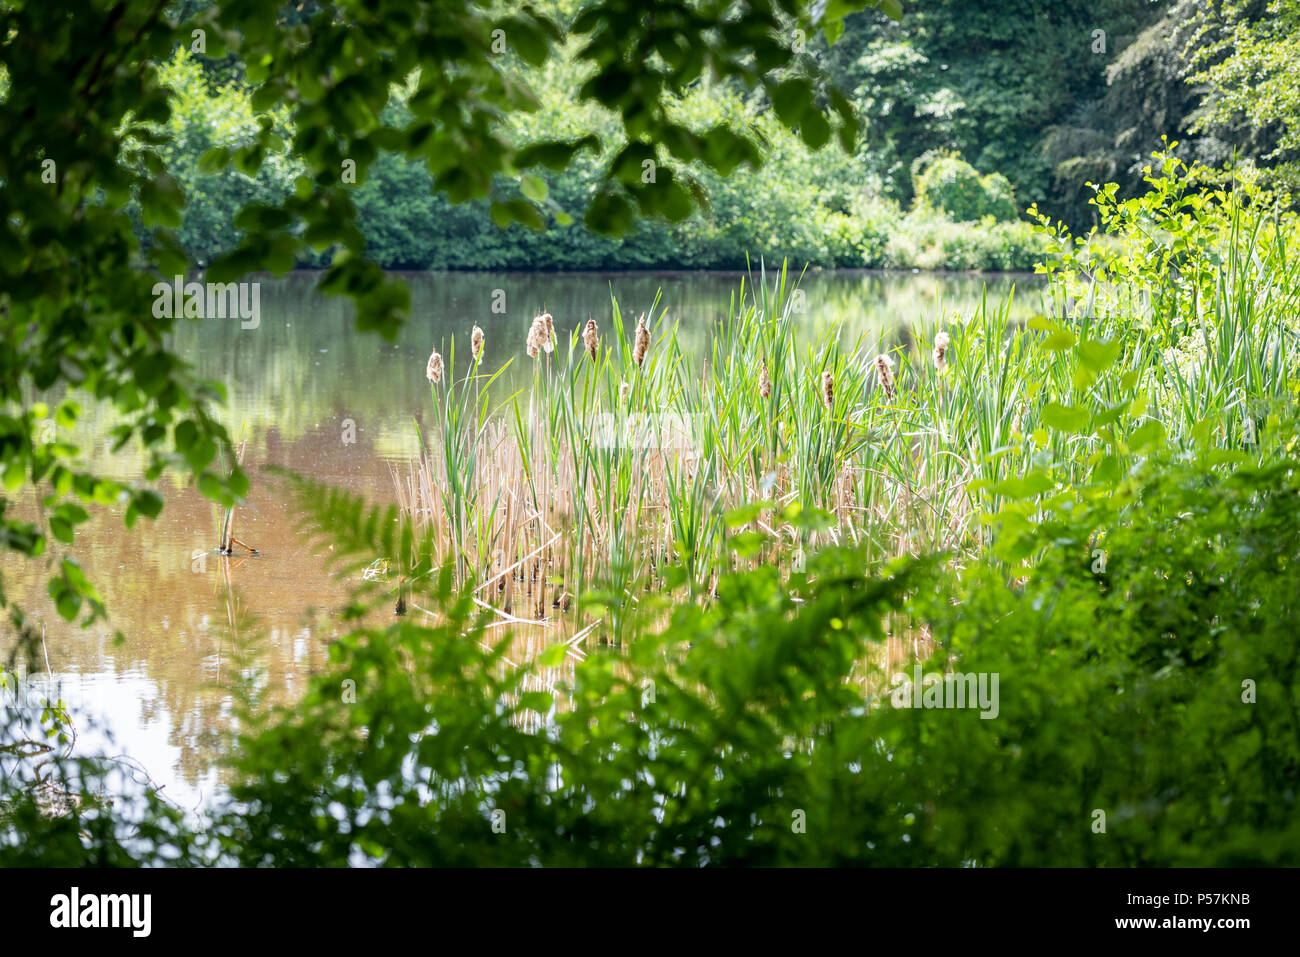 A lake surrounded by reeds and bullrushes in the summer in the UK countryside Stock Photo